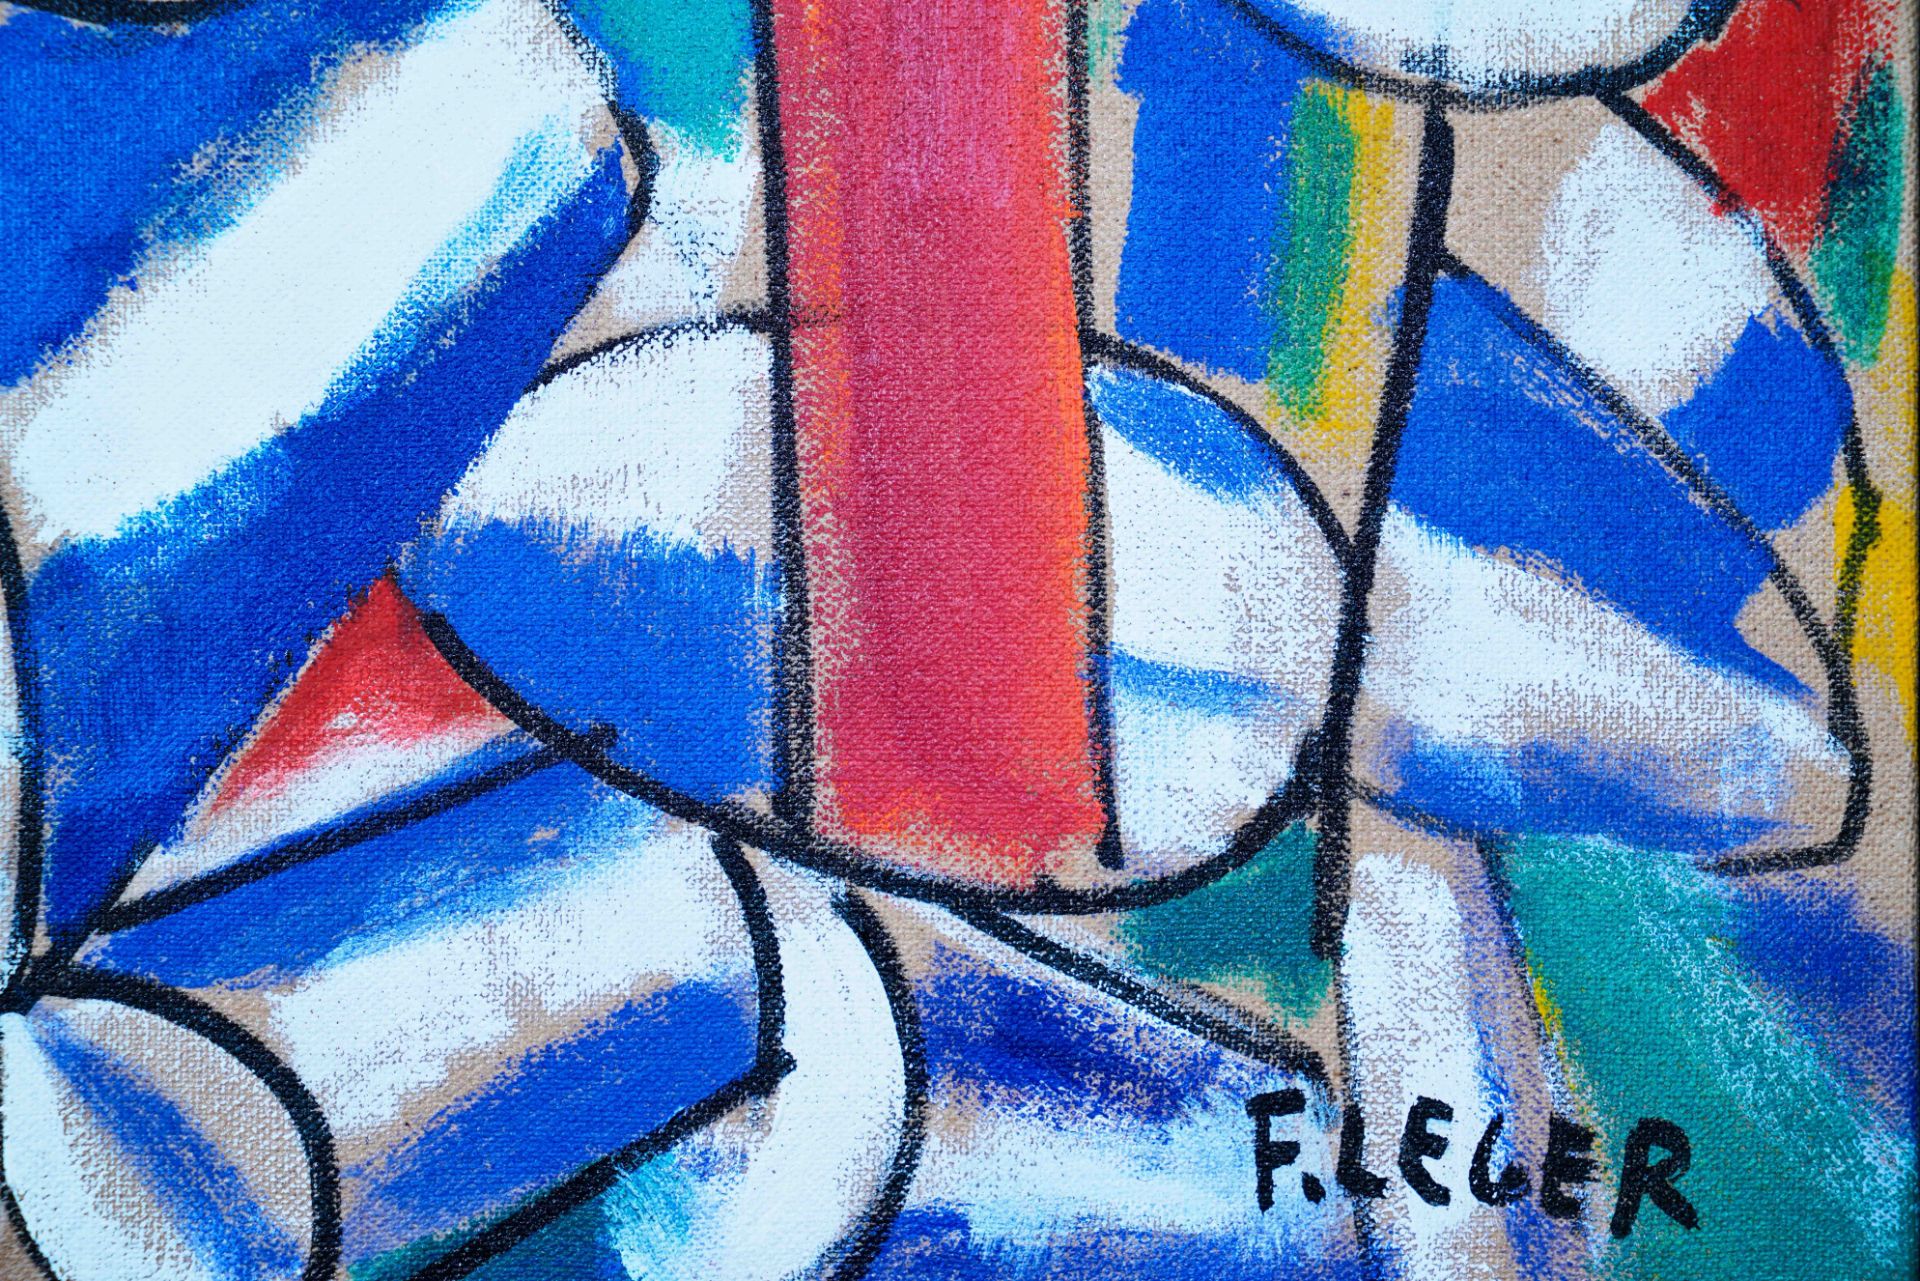 Fernand Leger (1881-1955), Oil on Canvas - Image 3 of 4